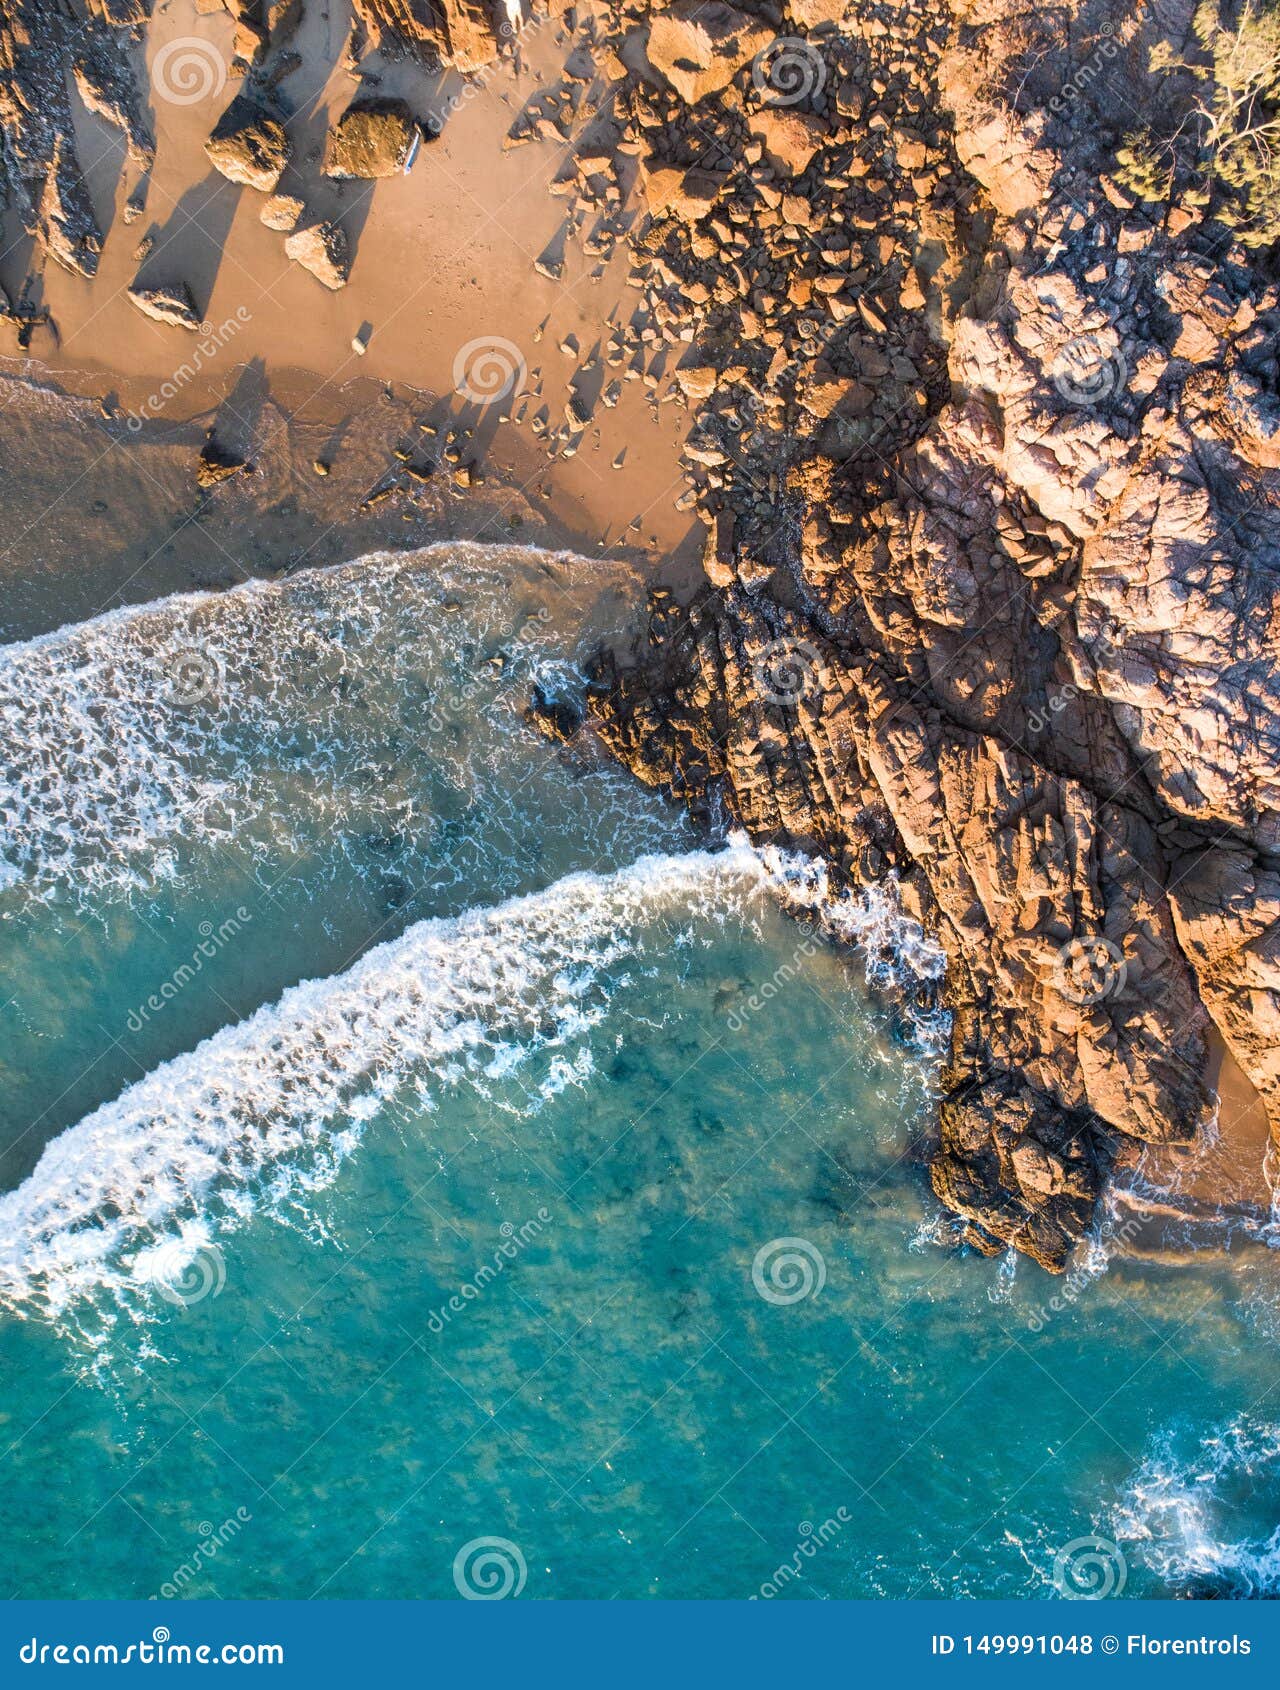 beautiful aerial view of a beach escape with nice beach, rocks and warm gentle waves